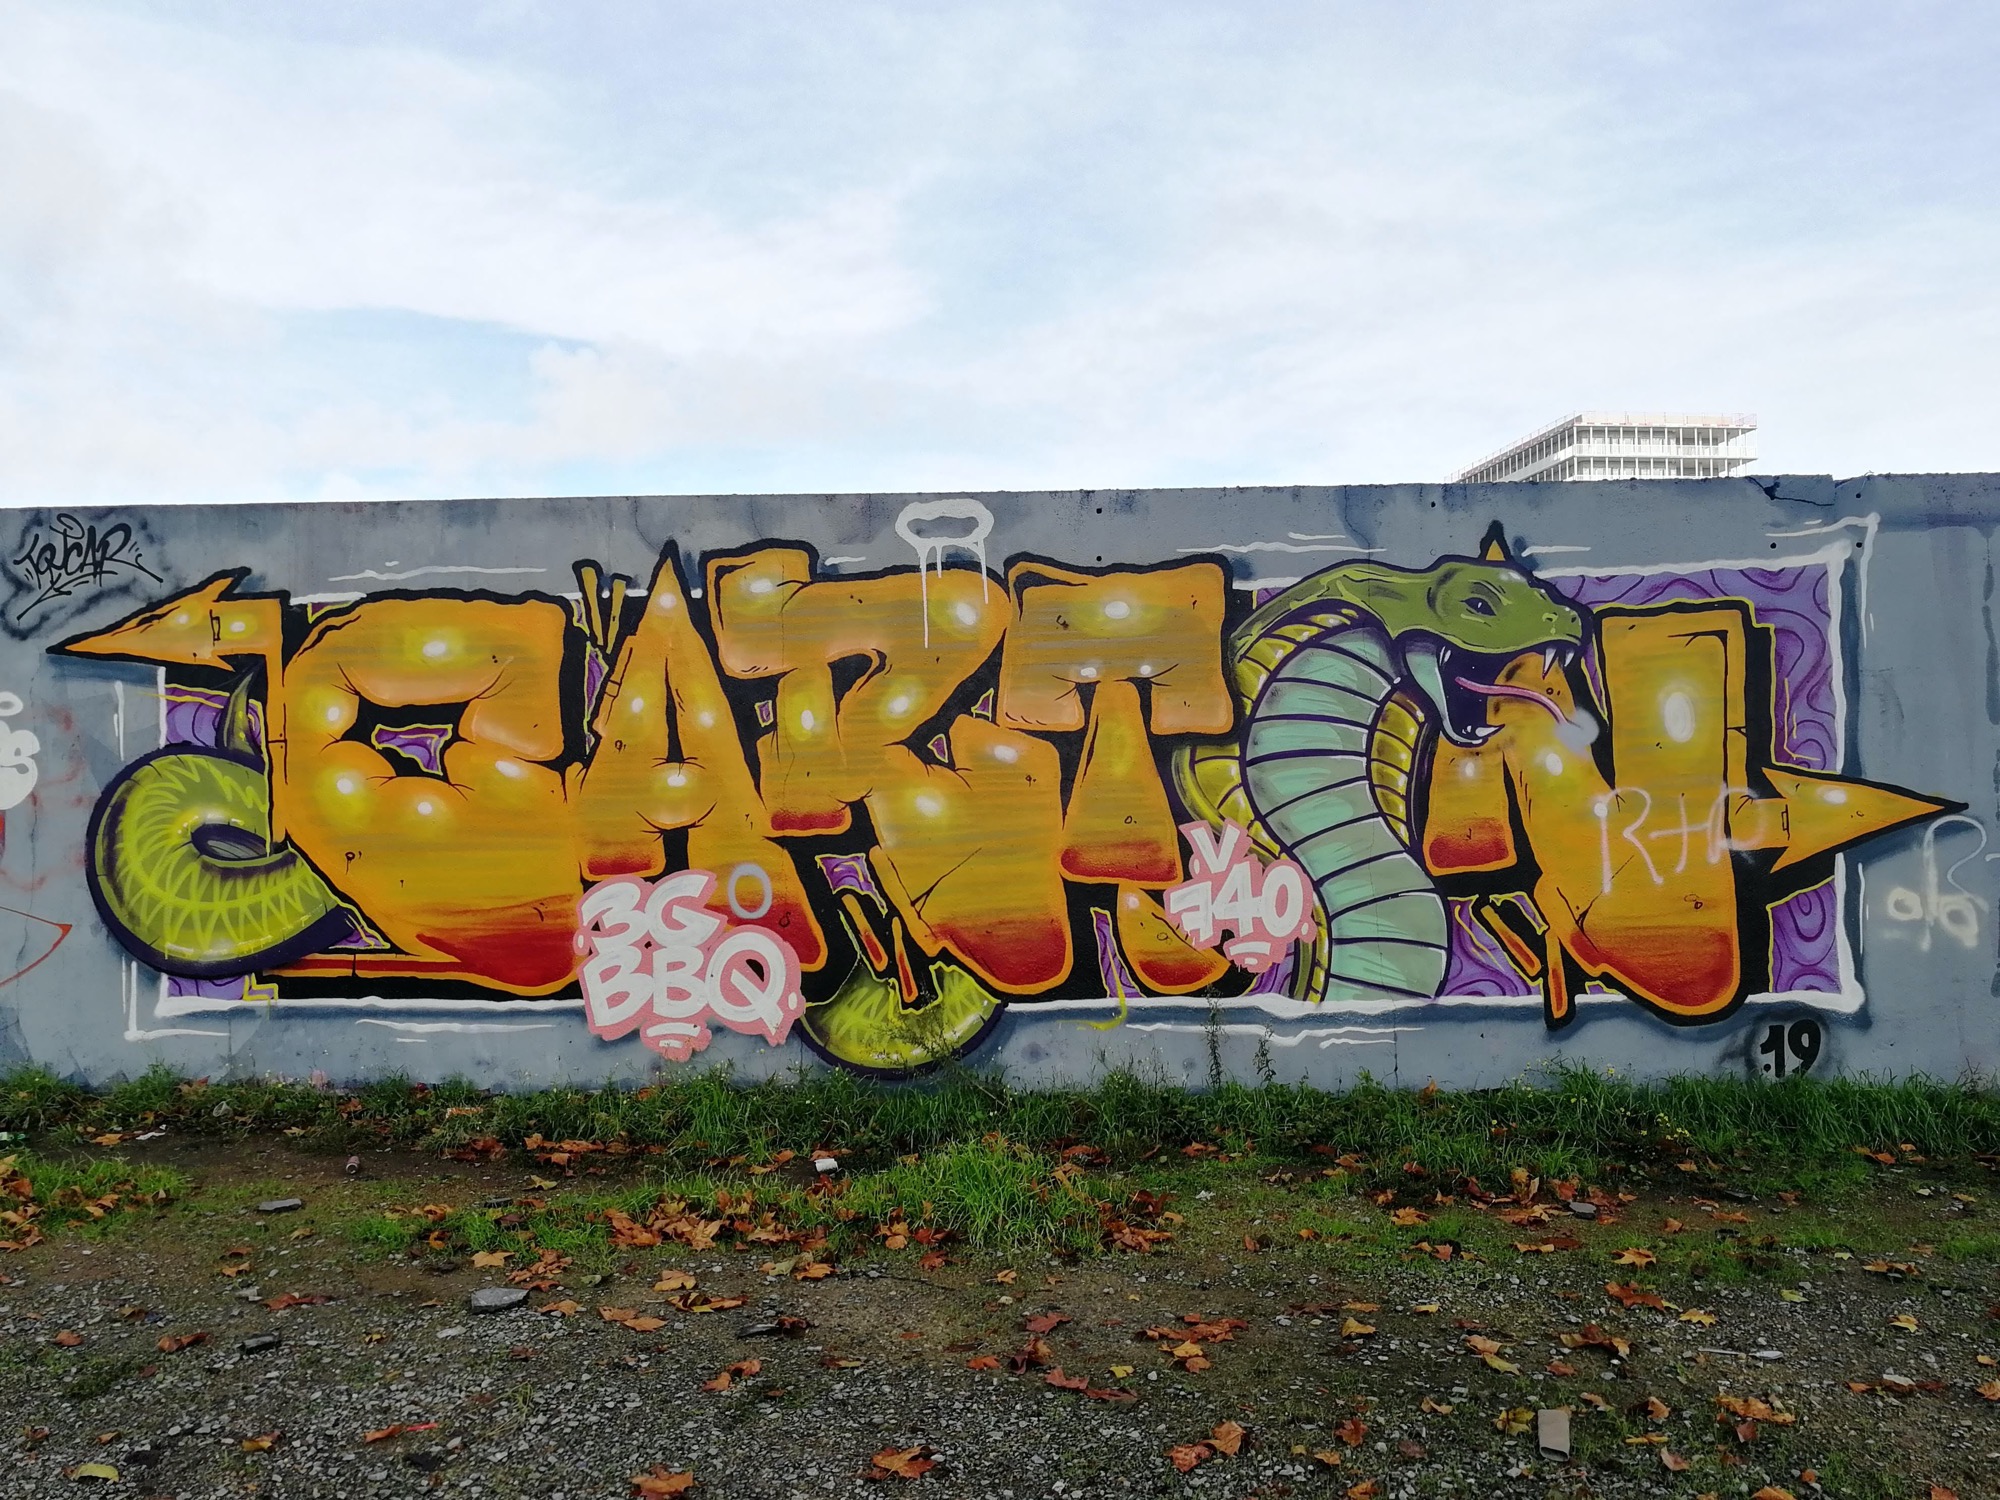 Graffiti 2990  captured by Rabot in Nantes France